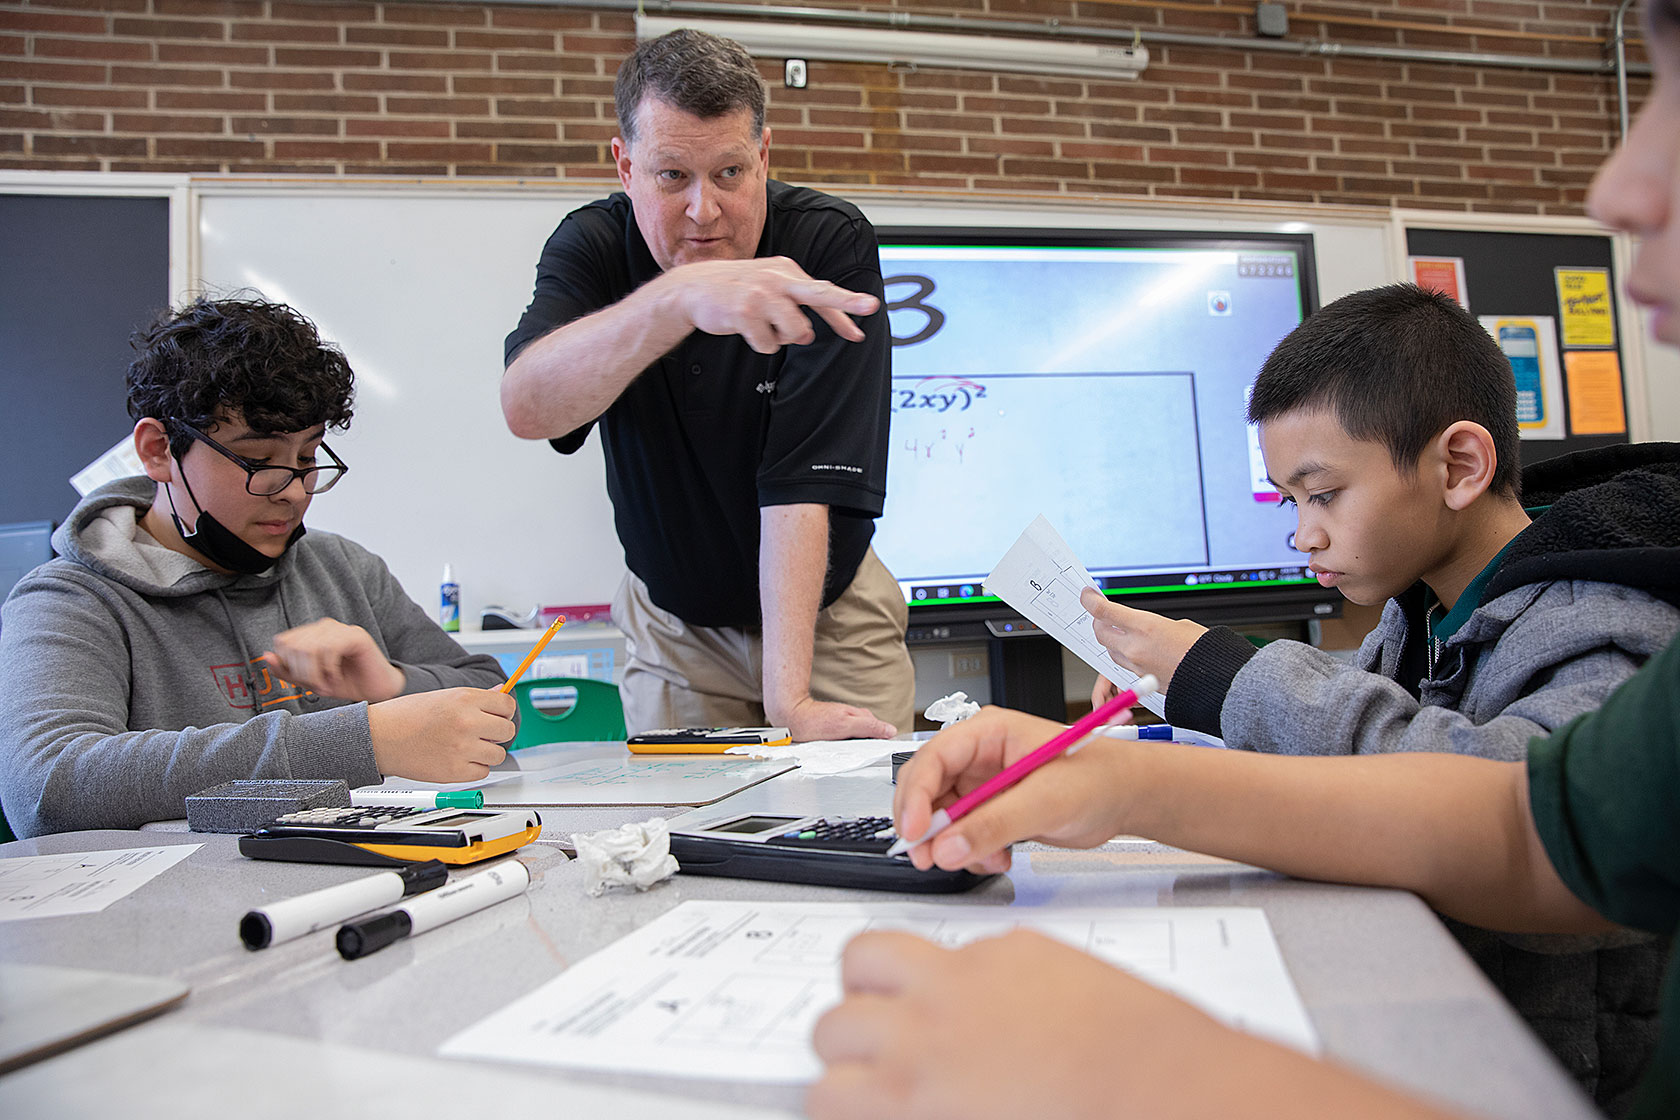 A retired teacher leads a math tutoring session with middle school students.